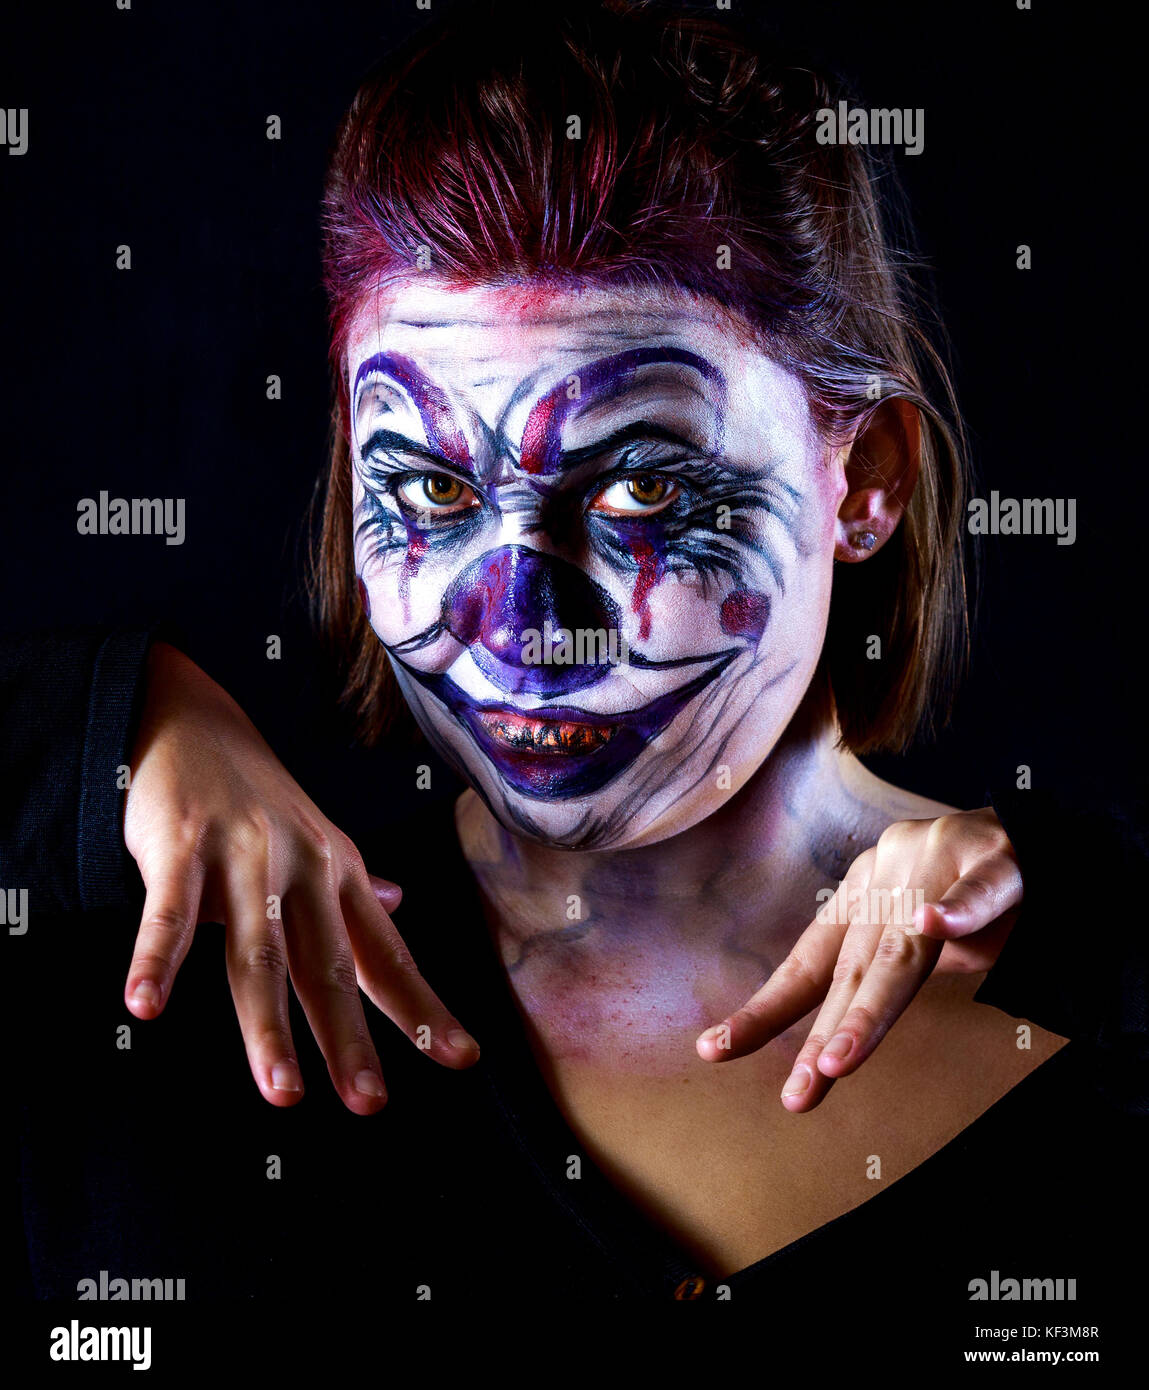 Scary Face painting